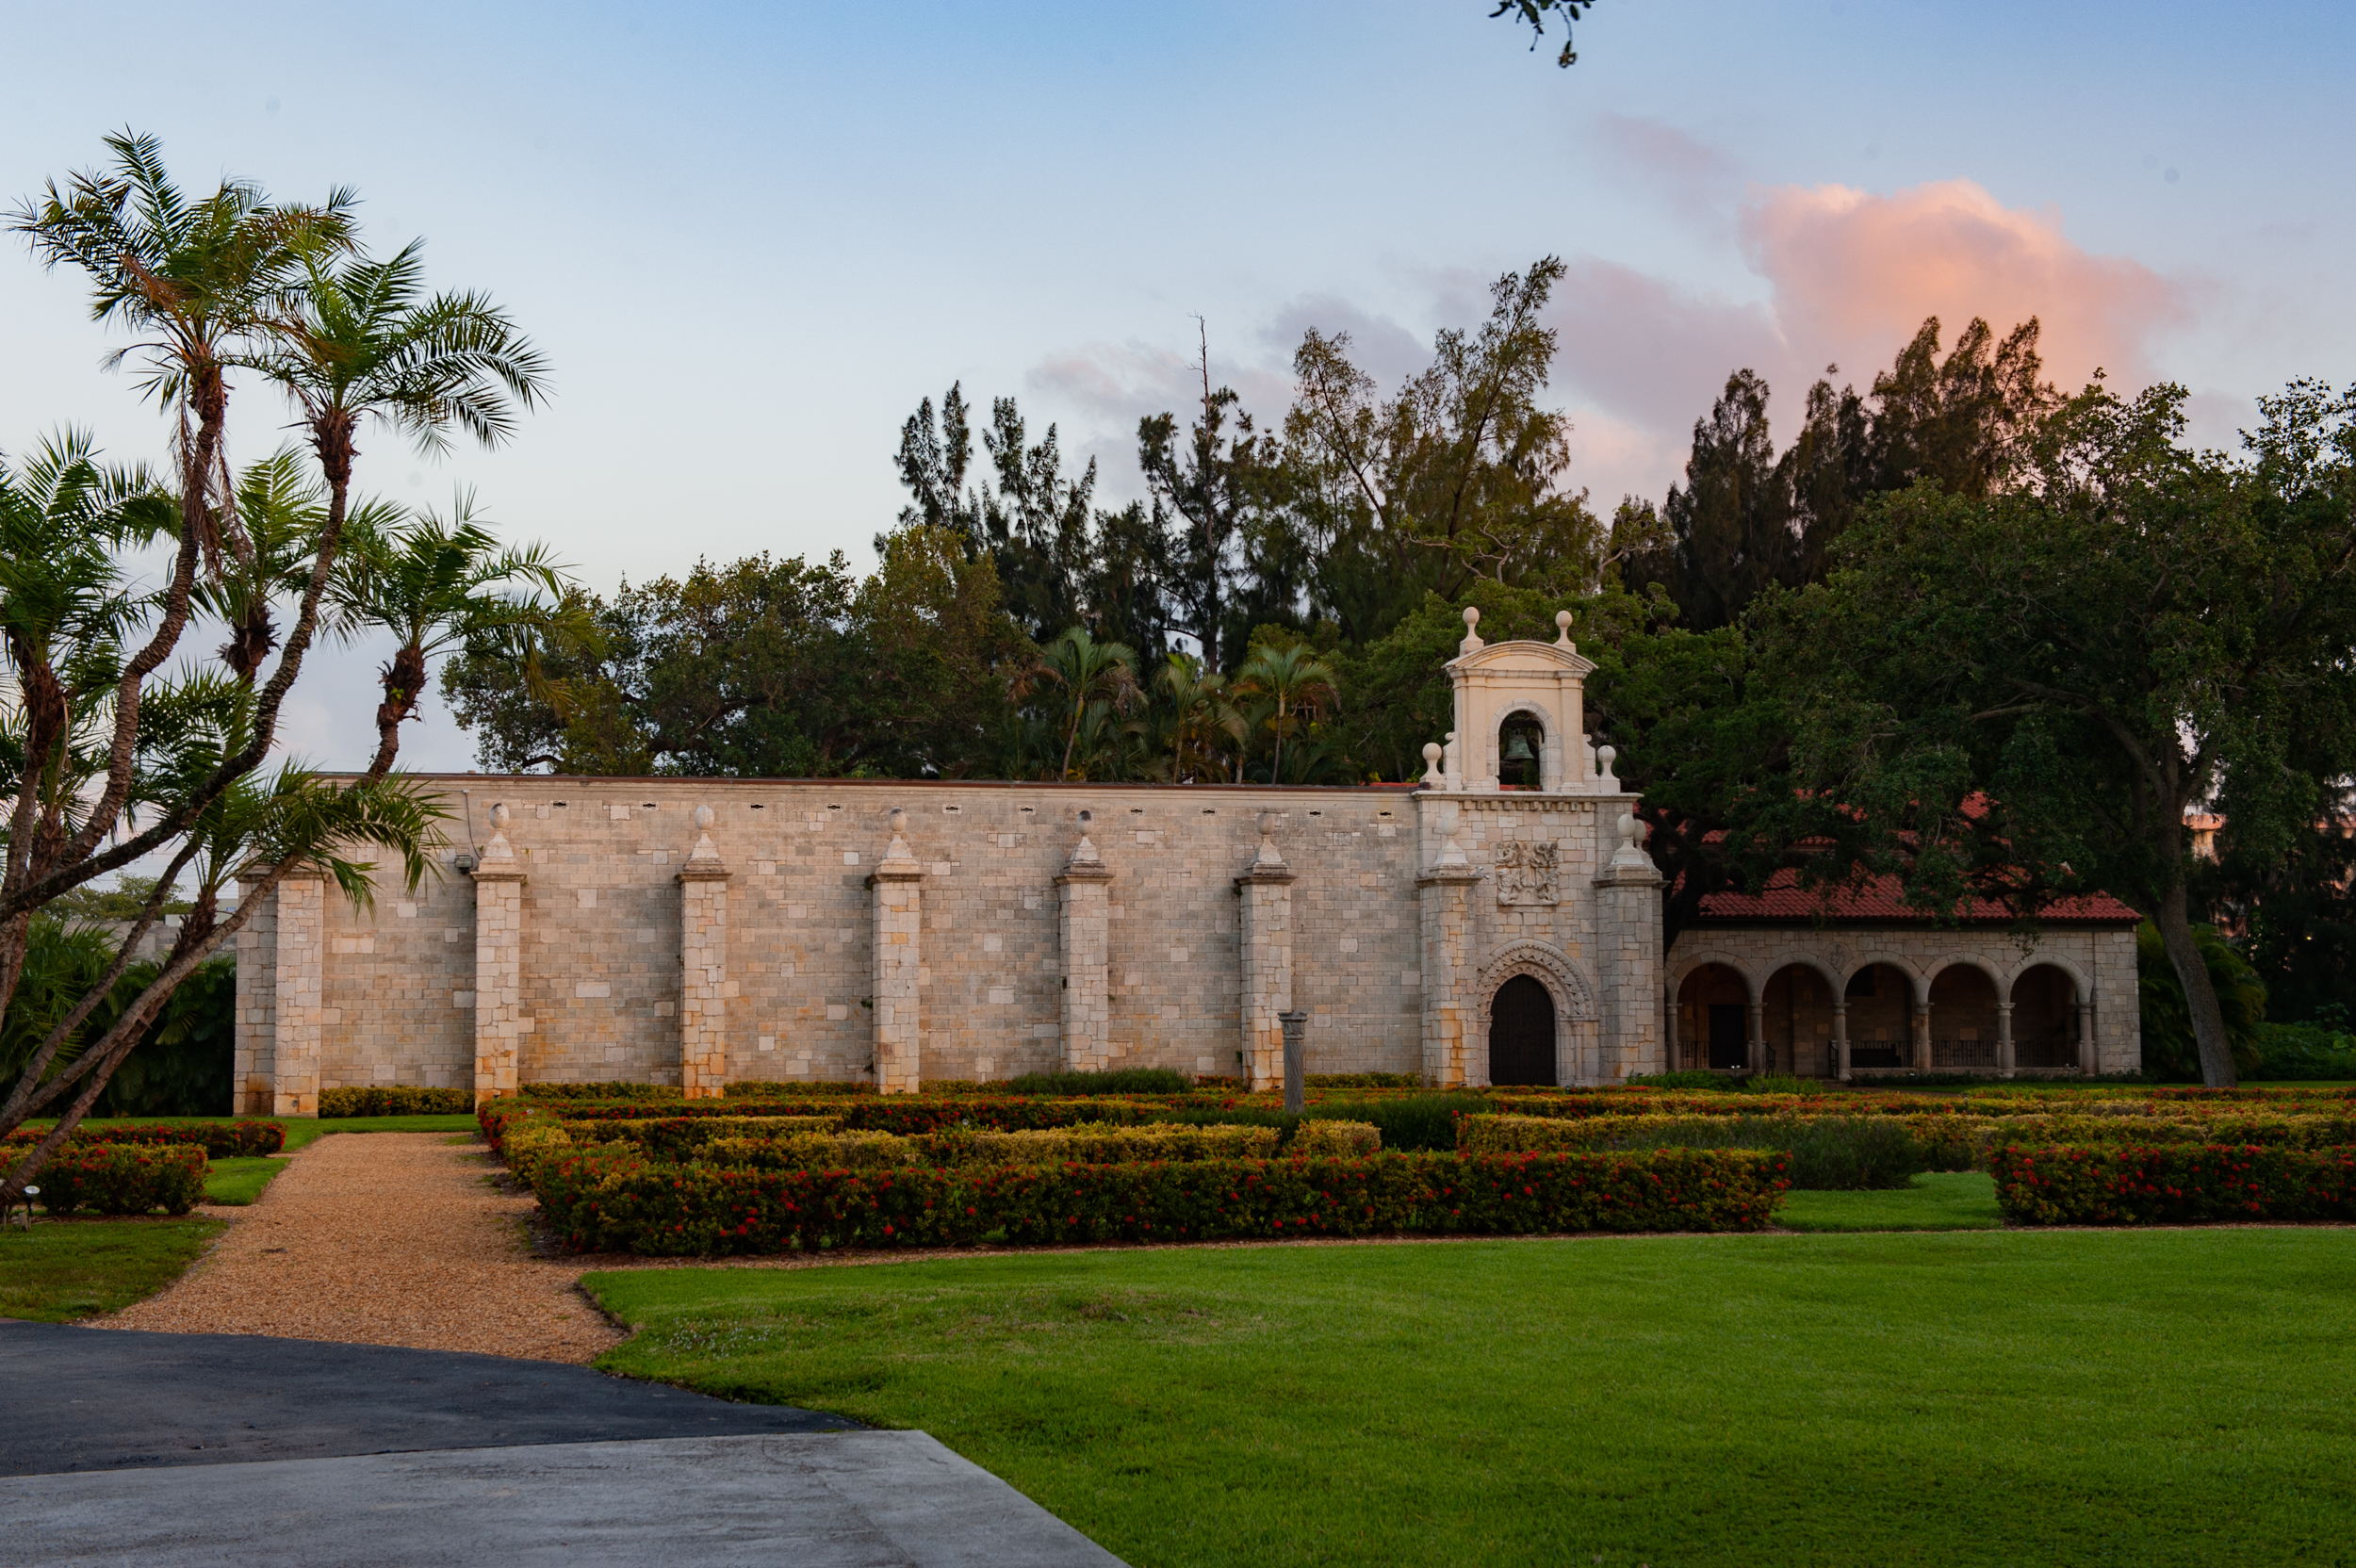 Spanish Monastery | Real Estate &amp; Architecture Photography